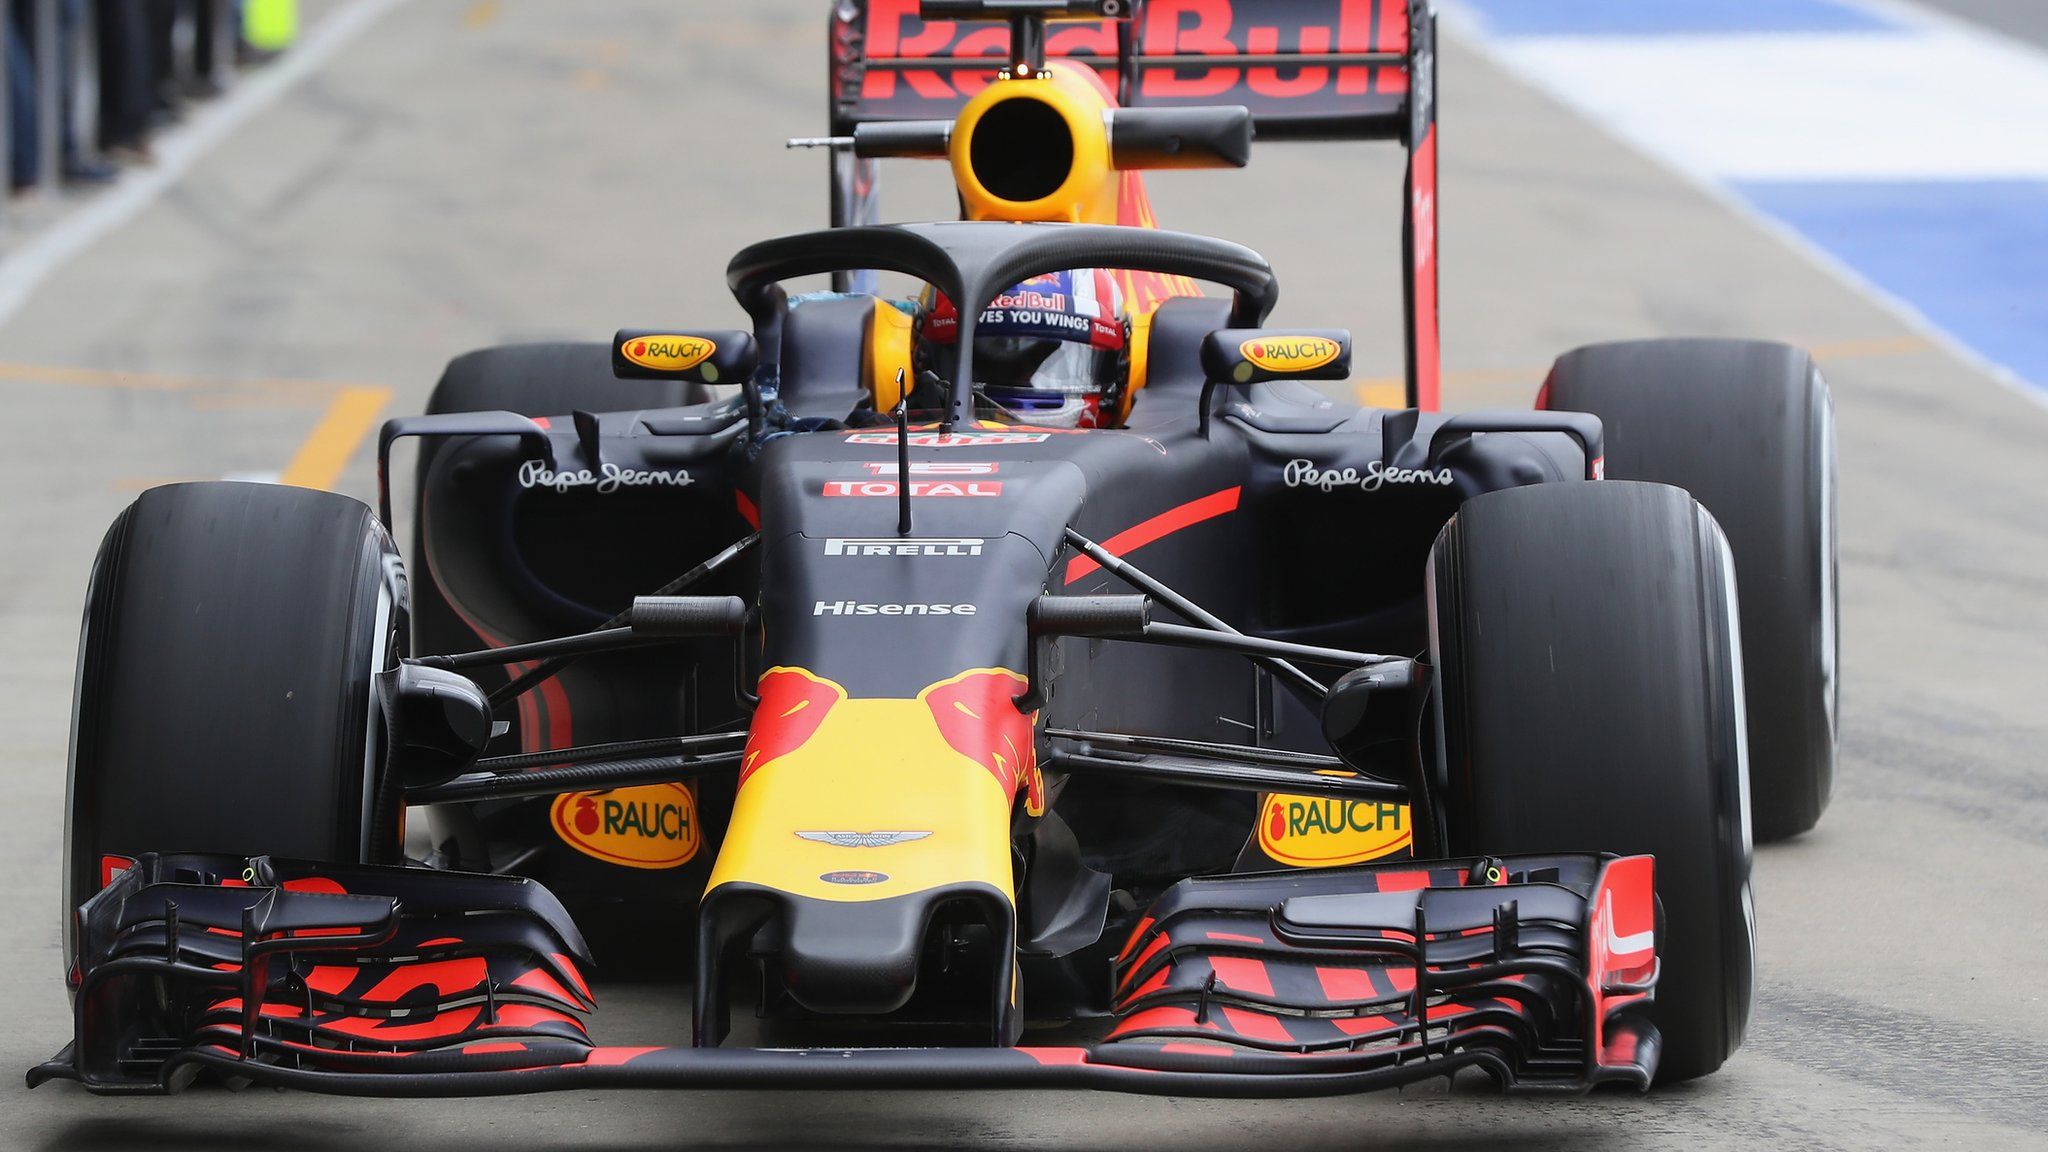 Red Bull driven by Pierre Gasly fitted with the halo device